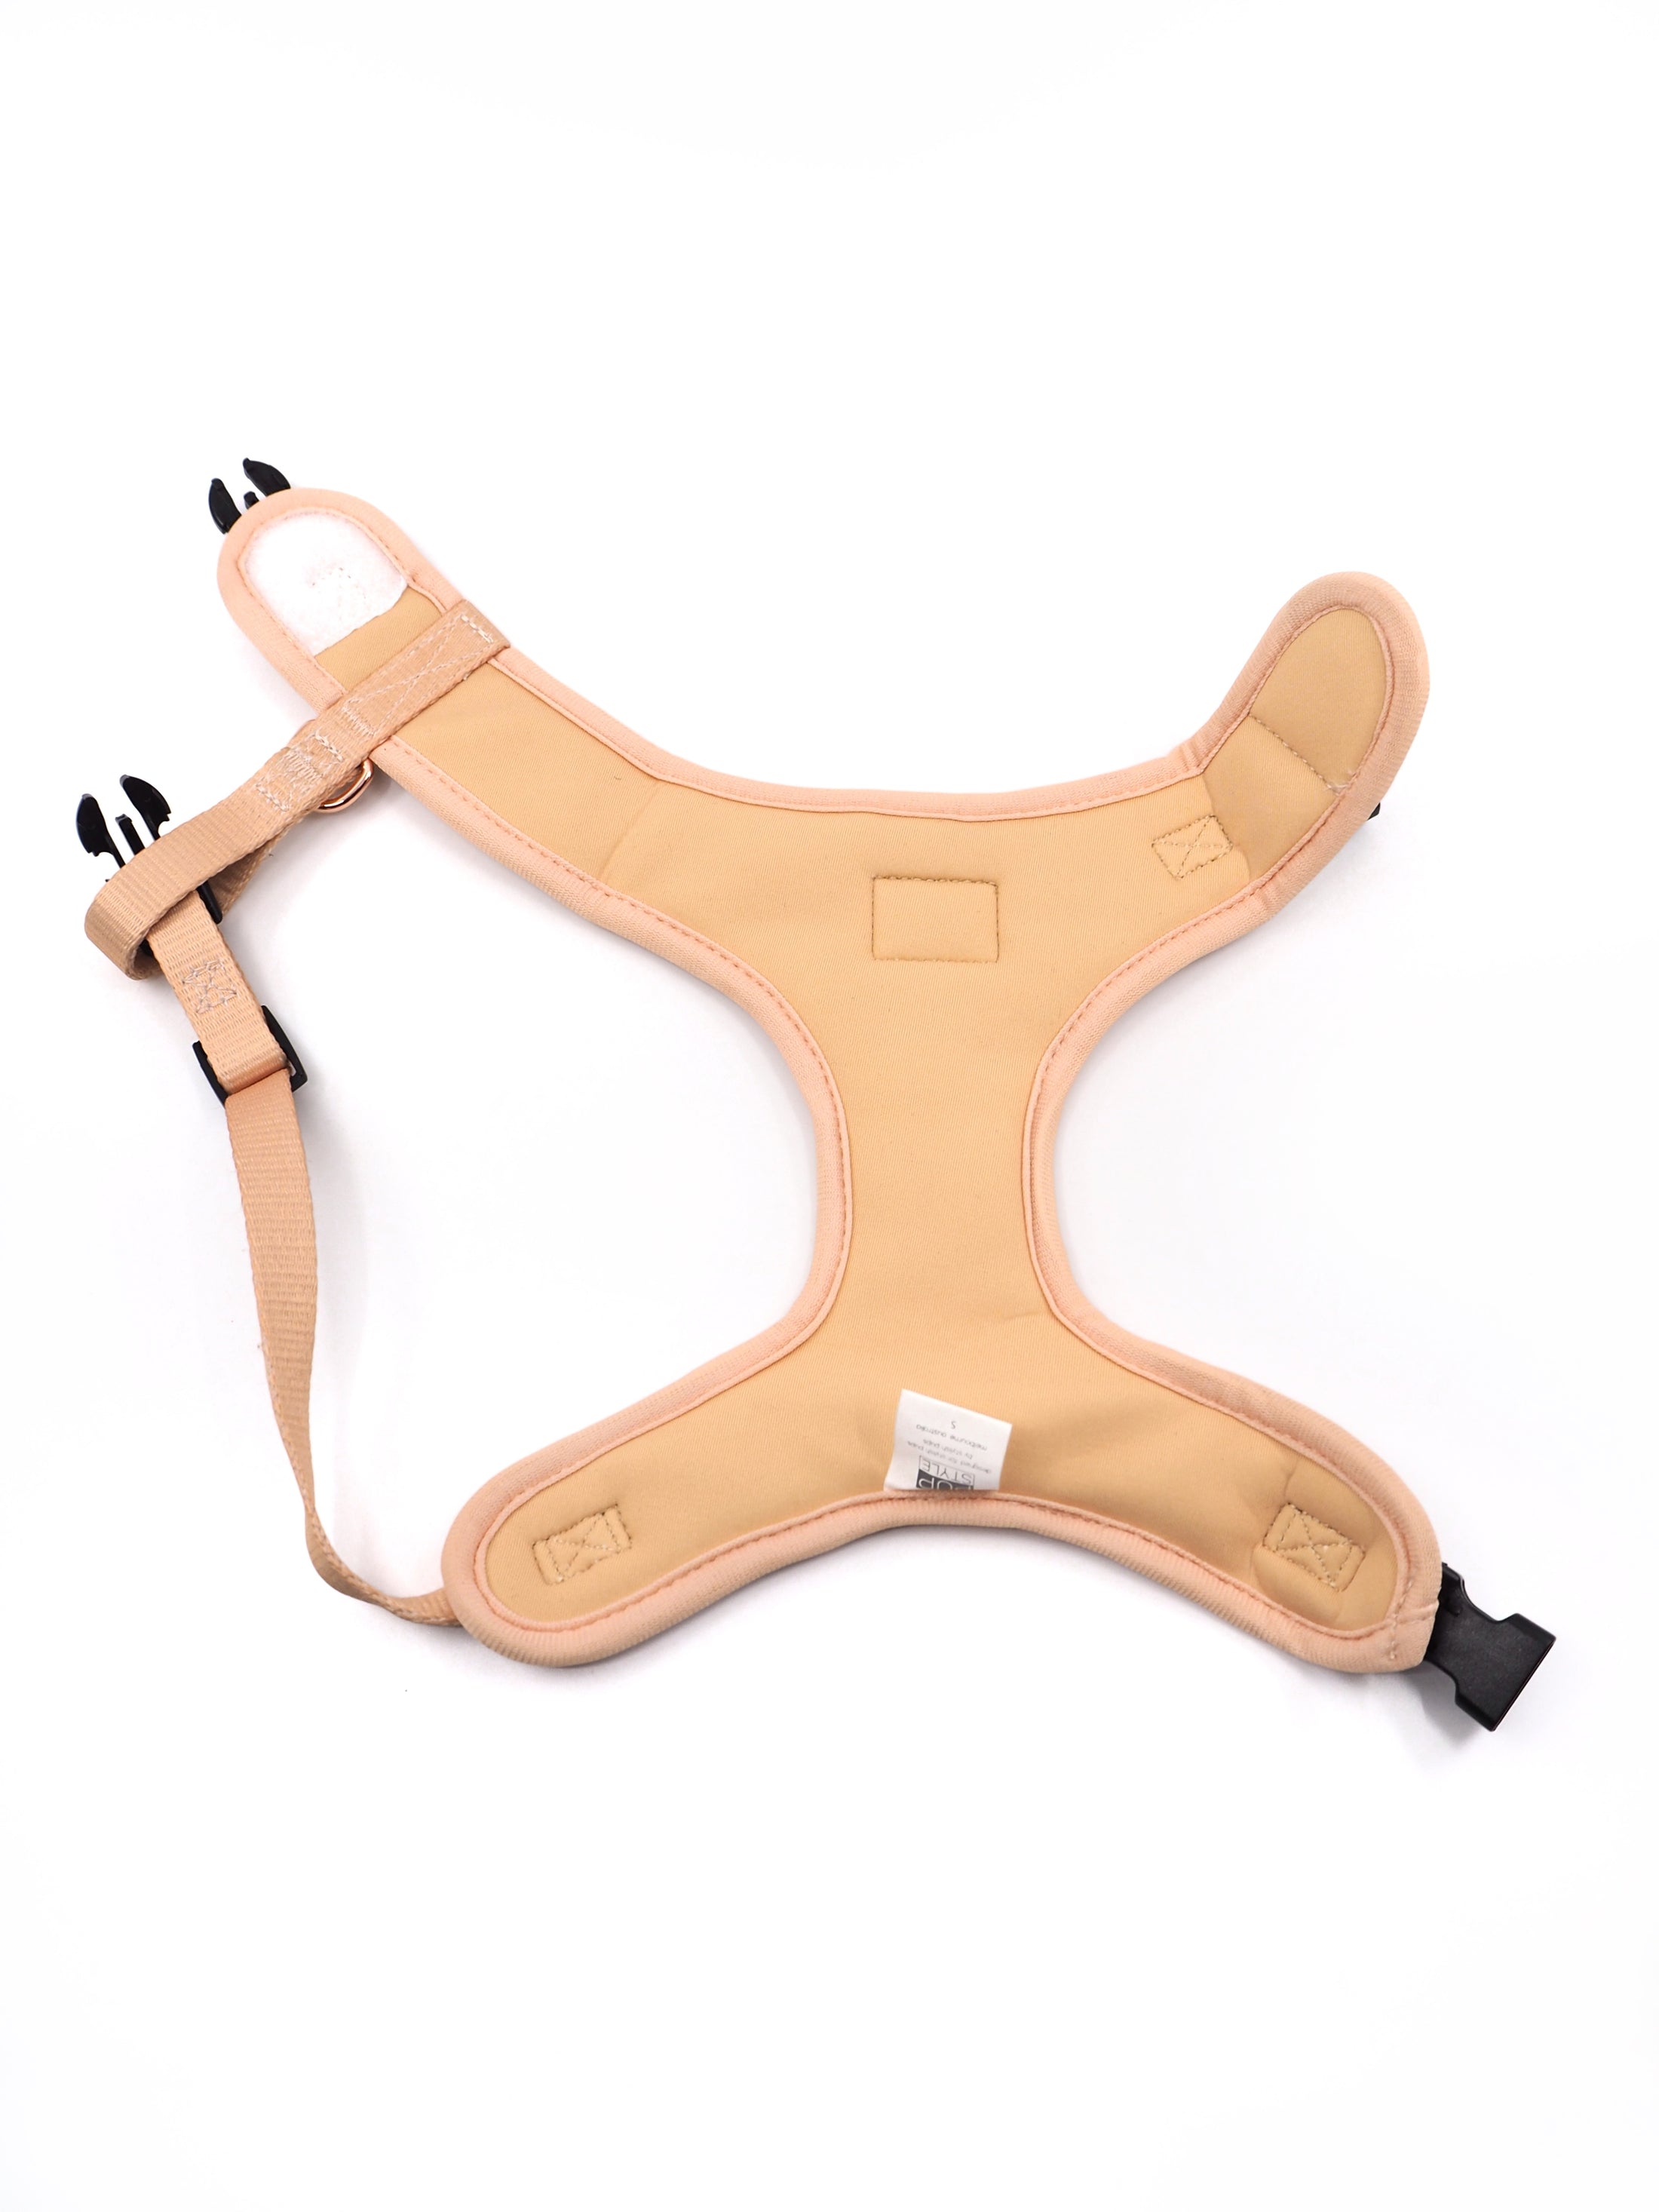 Creme Brulee Step In Harness by Pupstyle StoreHarness